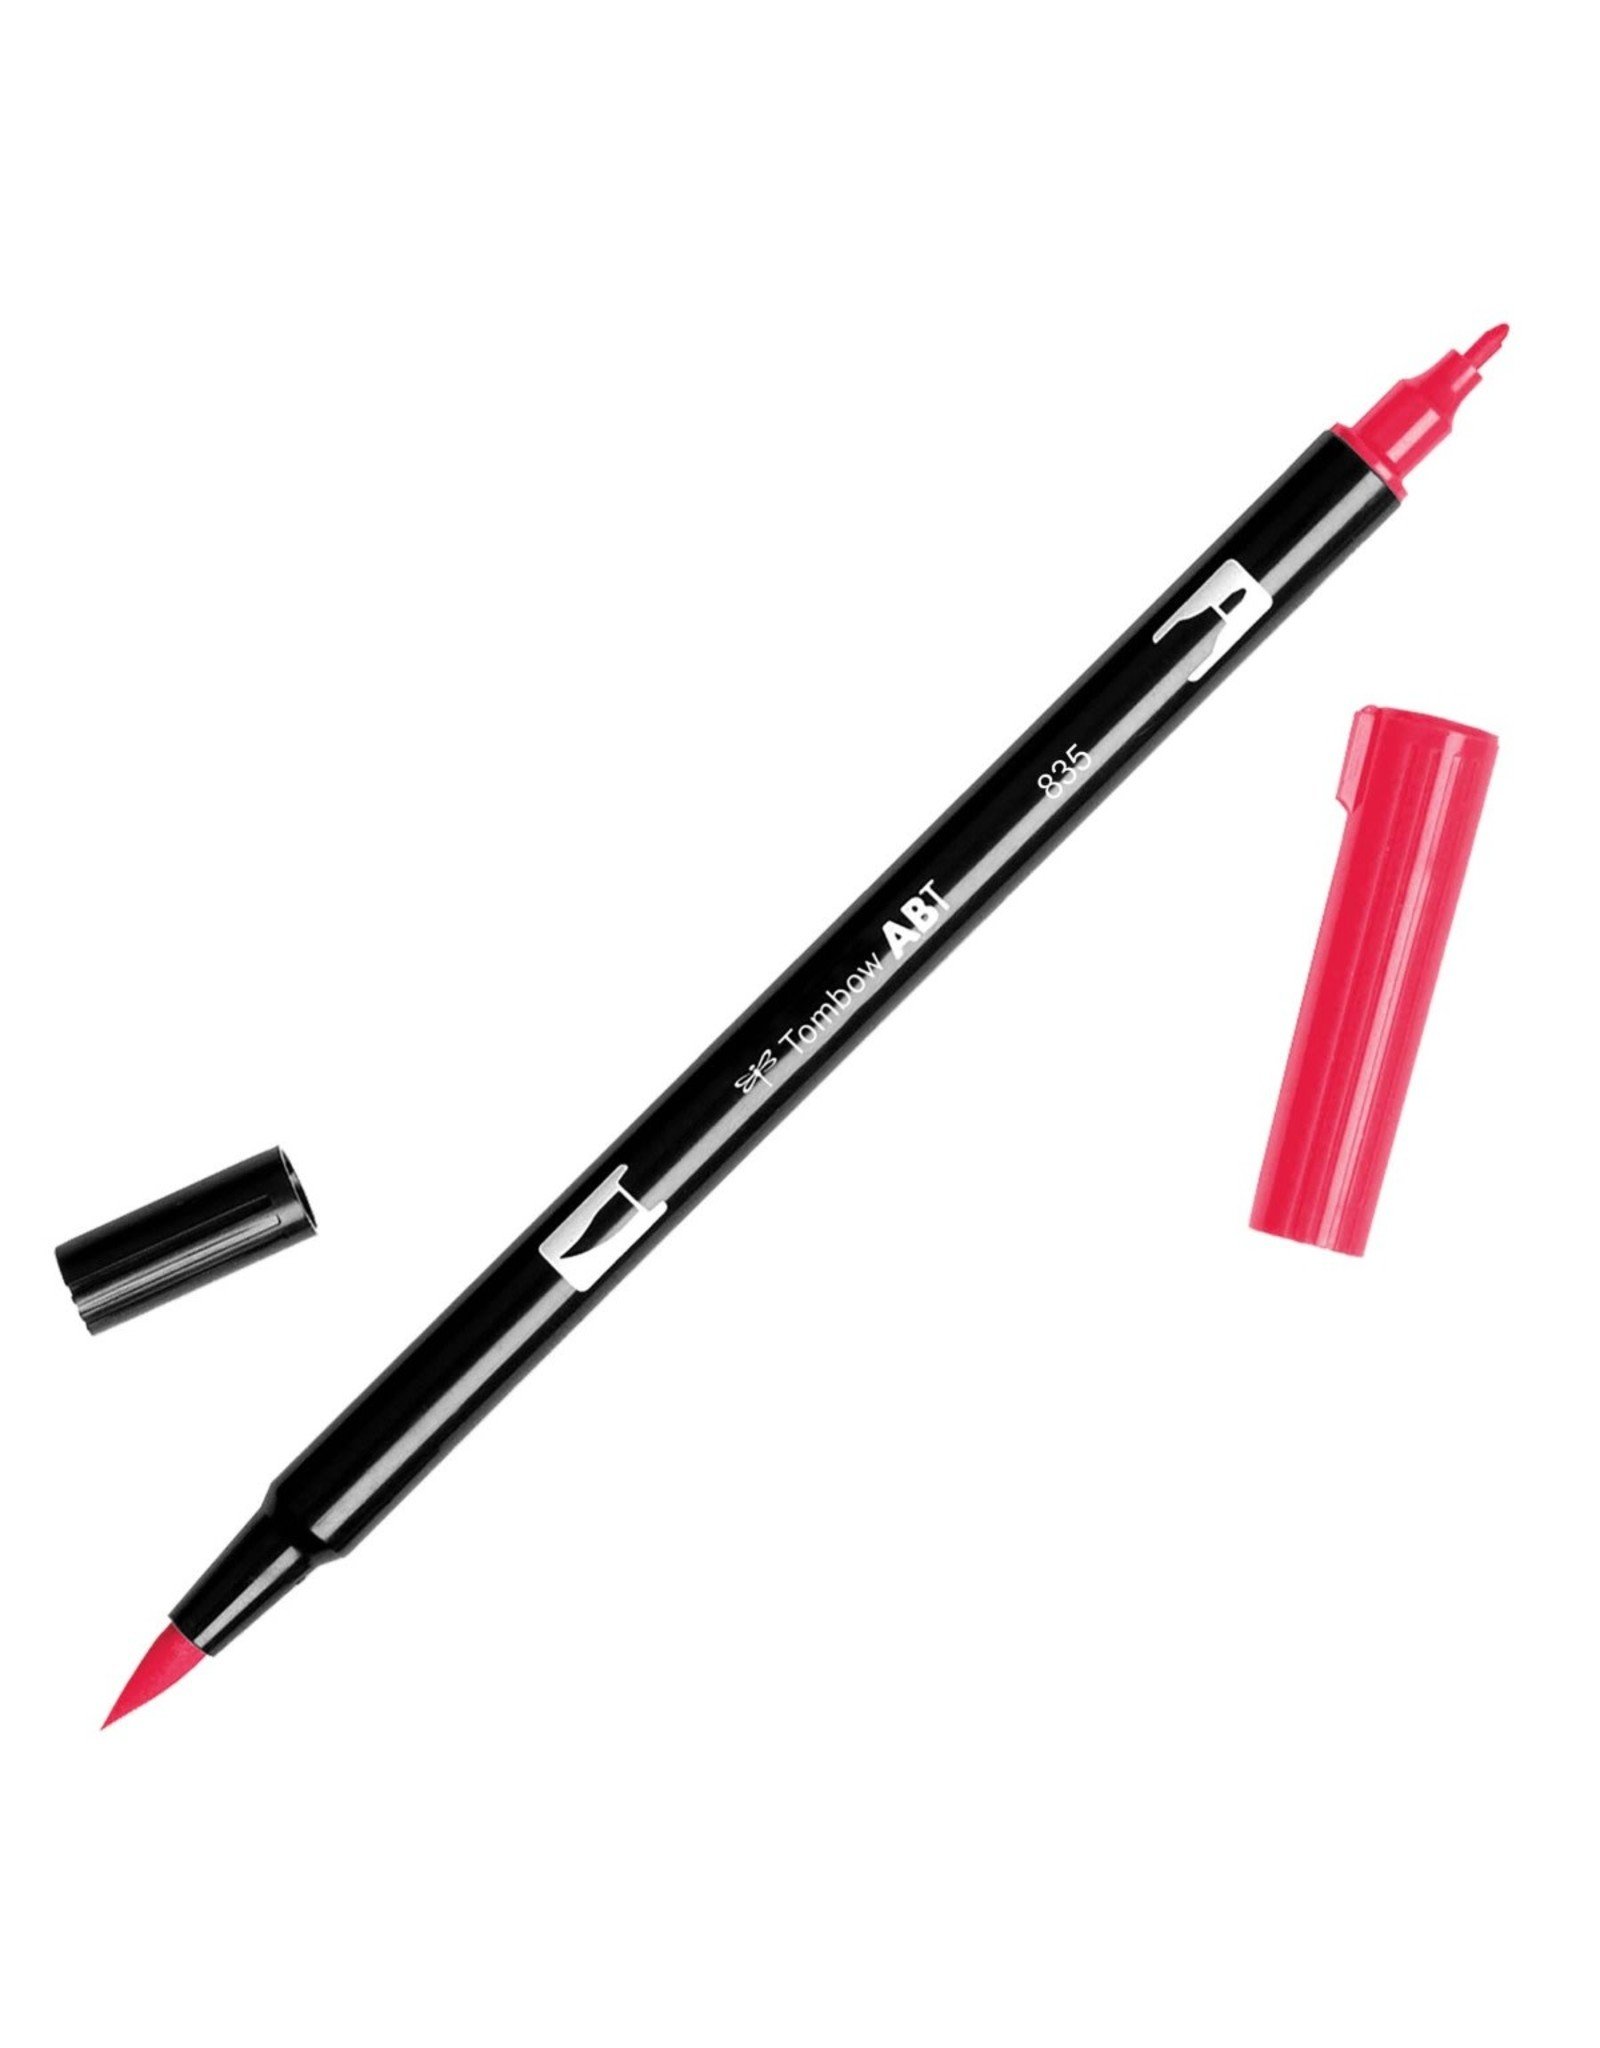 TOMBOW TOMBOW ABT-835 PERSIMMON DUAL BRUSH MARKER